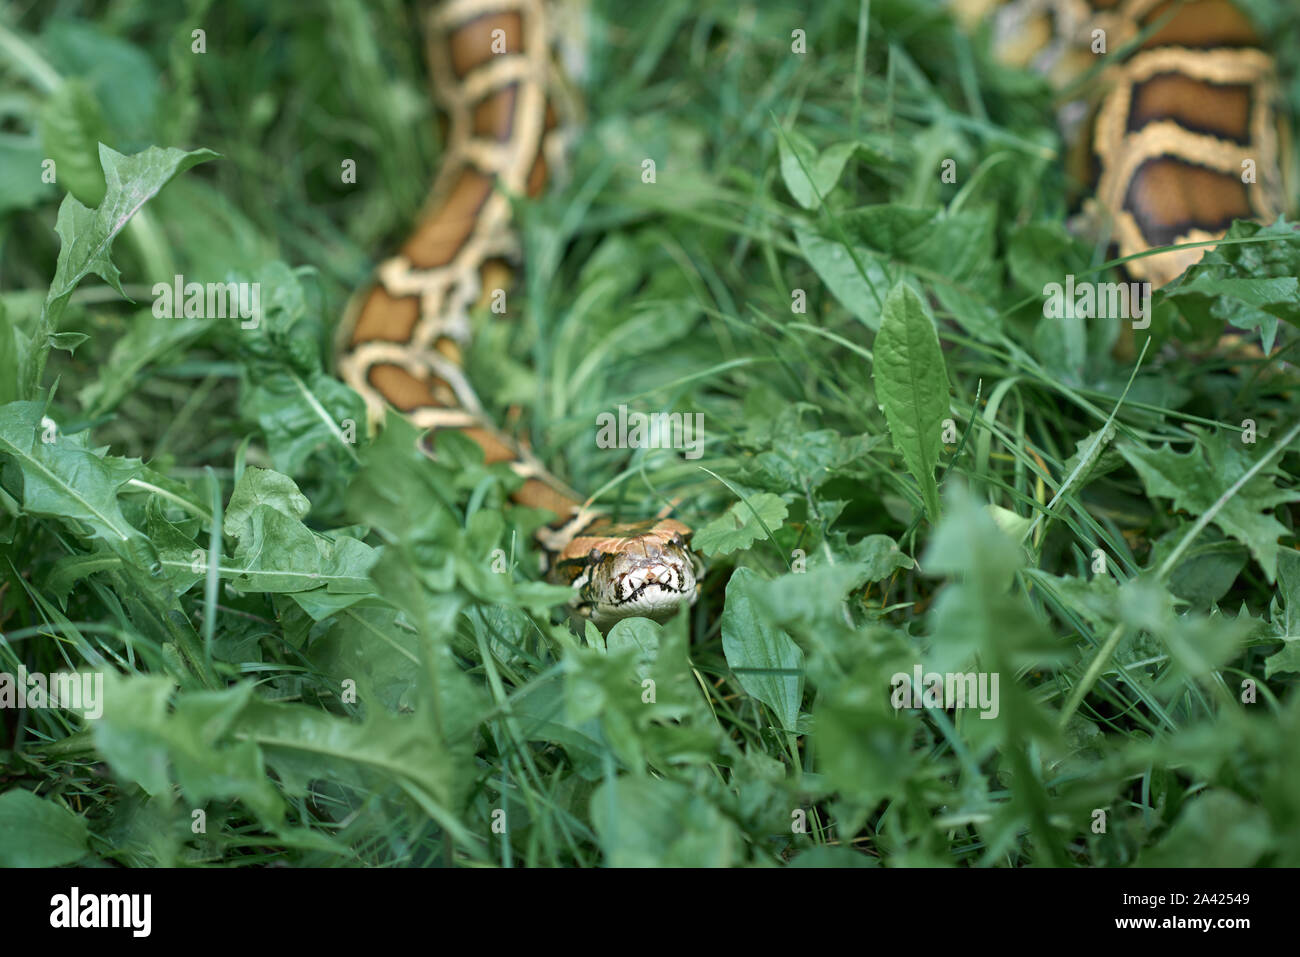 Scary snake, phyton lying in greenery, meadow outdoors. Concept of zoology, animals Stock Photo